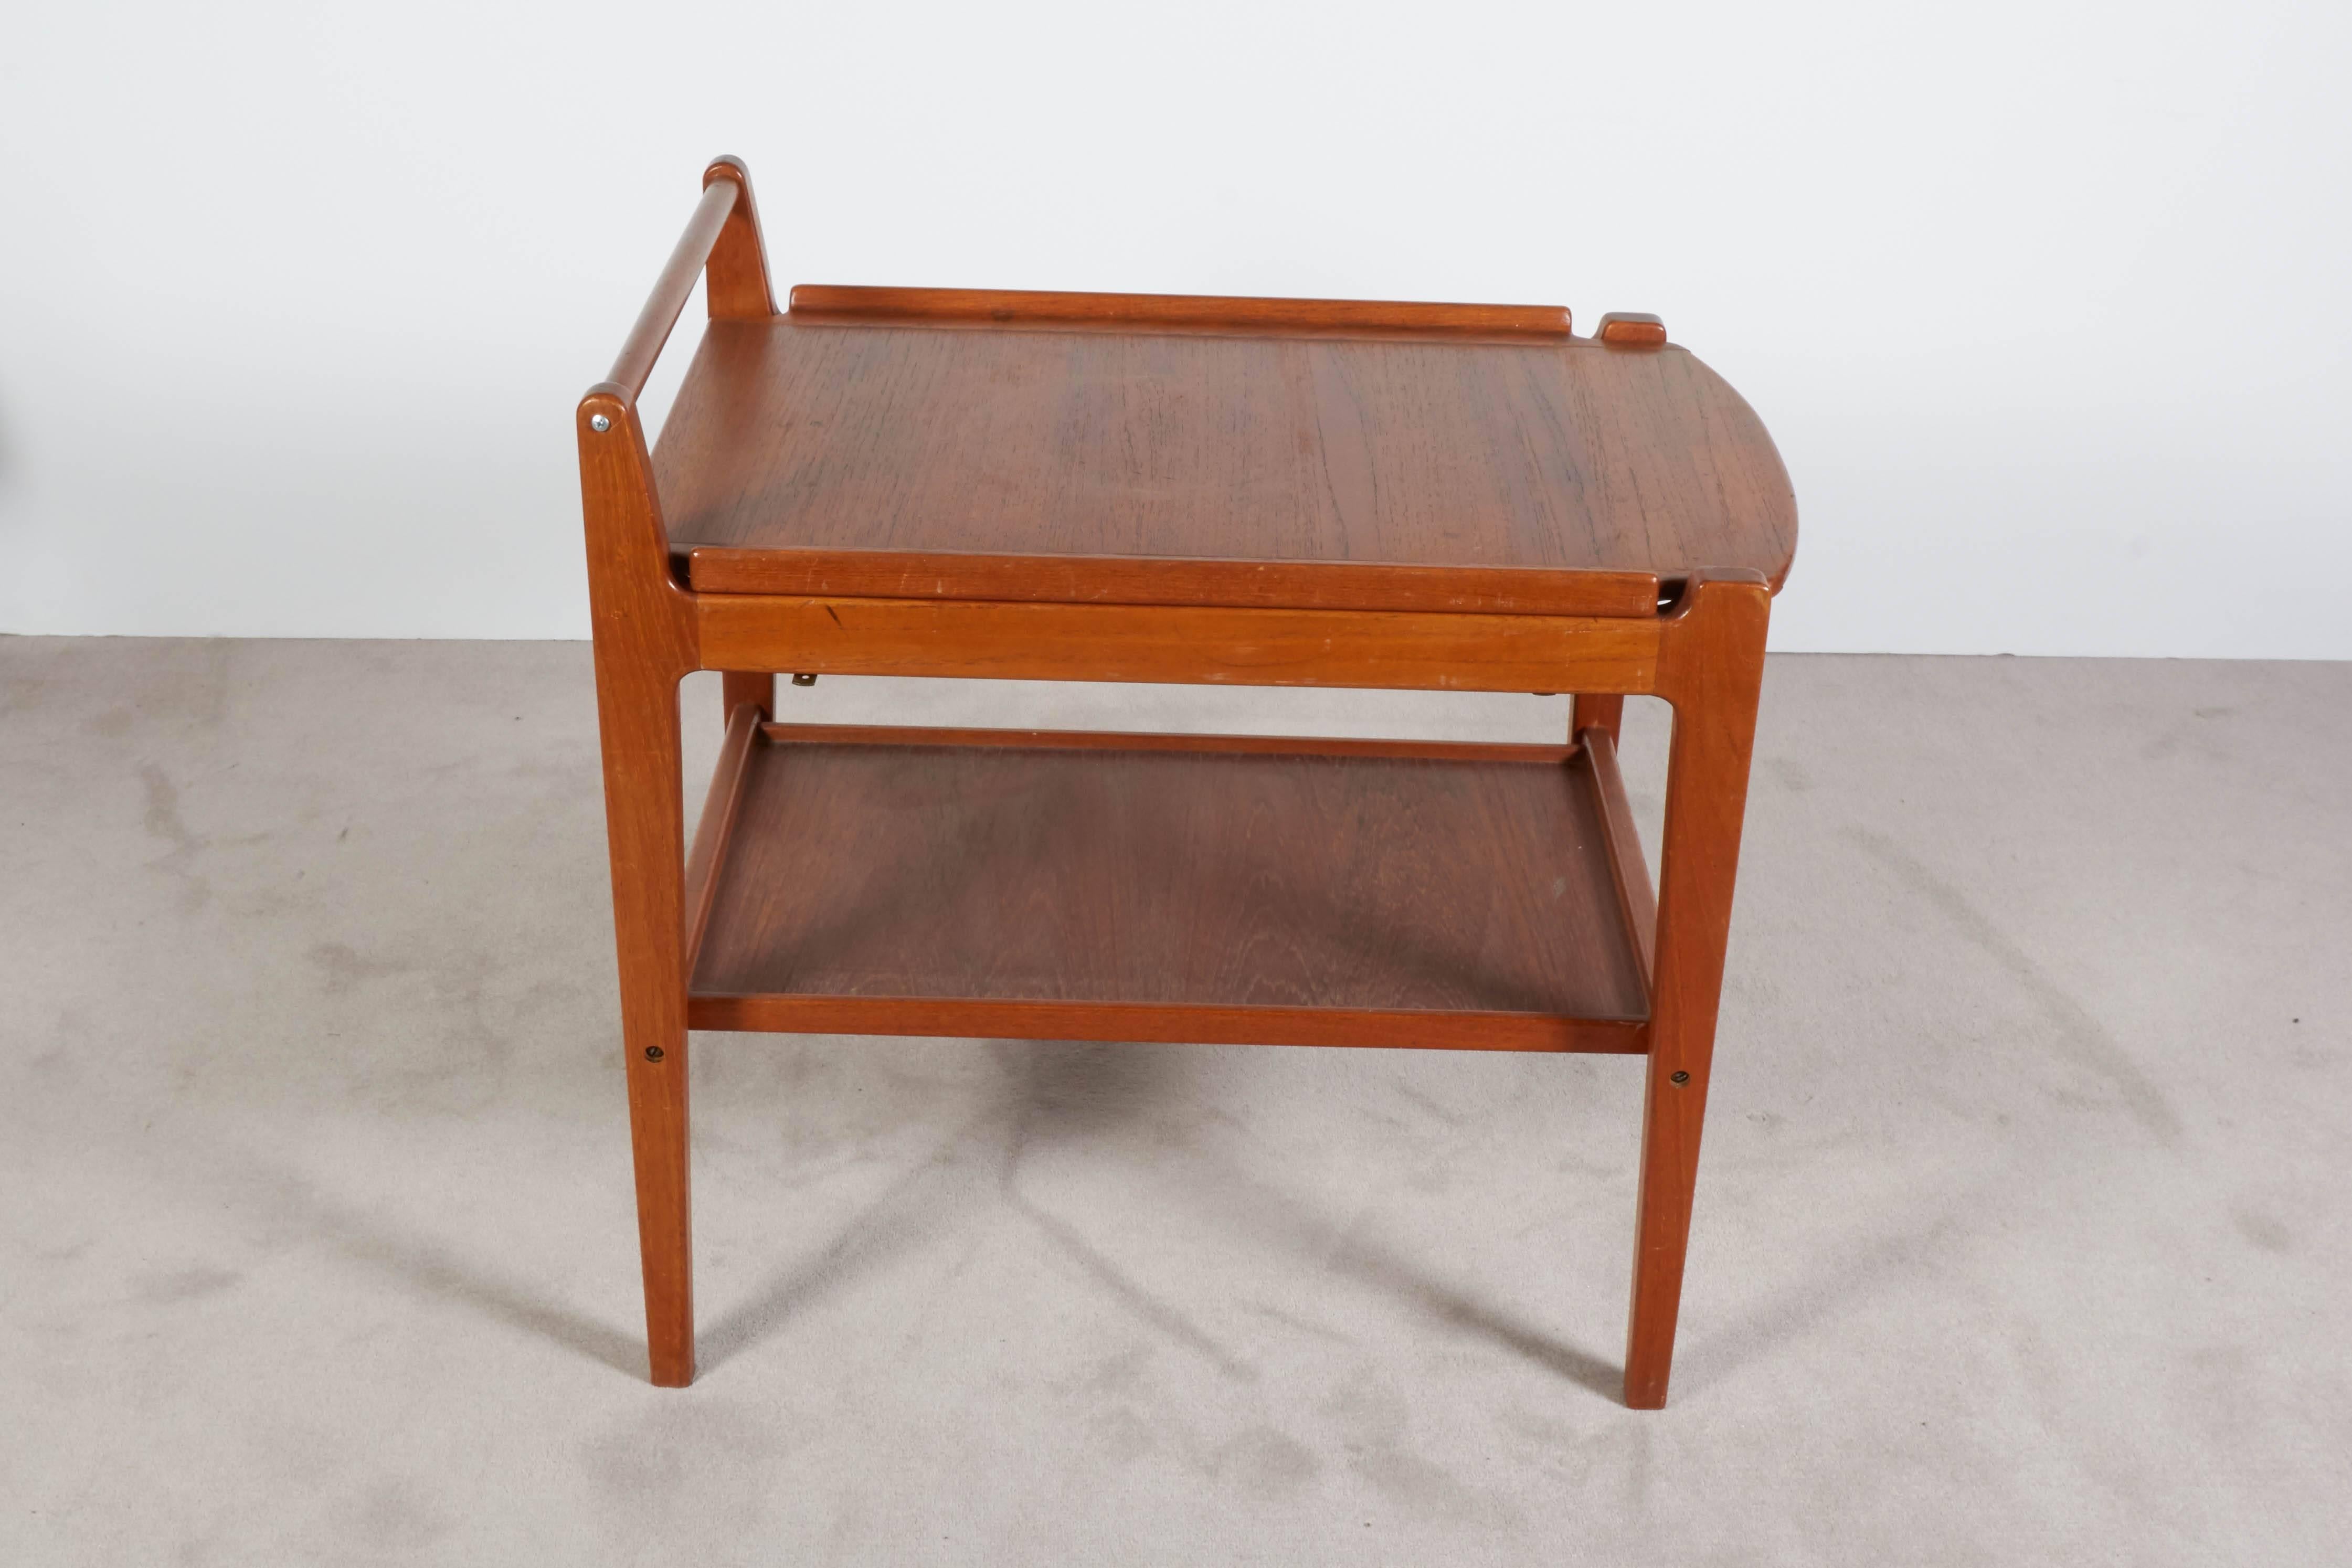 Danish Scandinavian Modern bar cart, produced circa 1960s, crafted entirely of teak, with removable tray top and secondary shelf. Very good vintage condition, recently refinished, including loss of caster wheels.